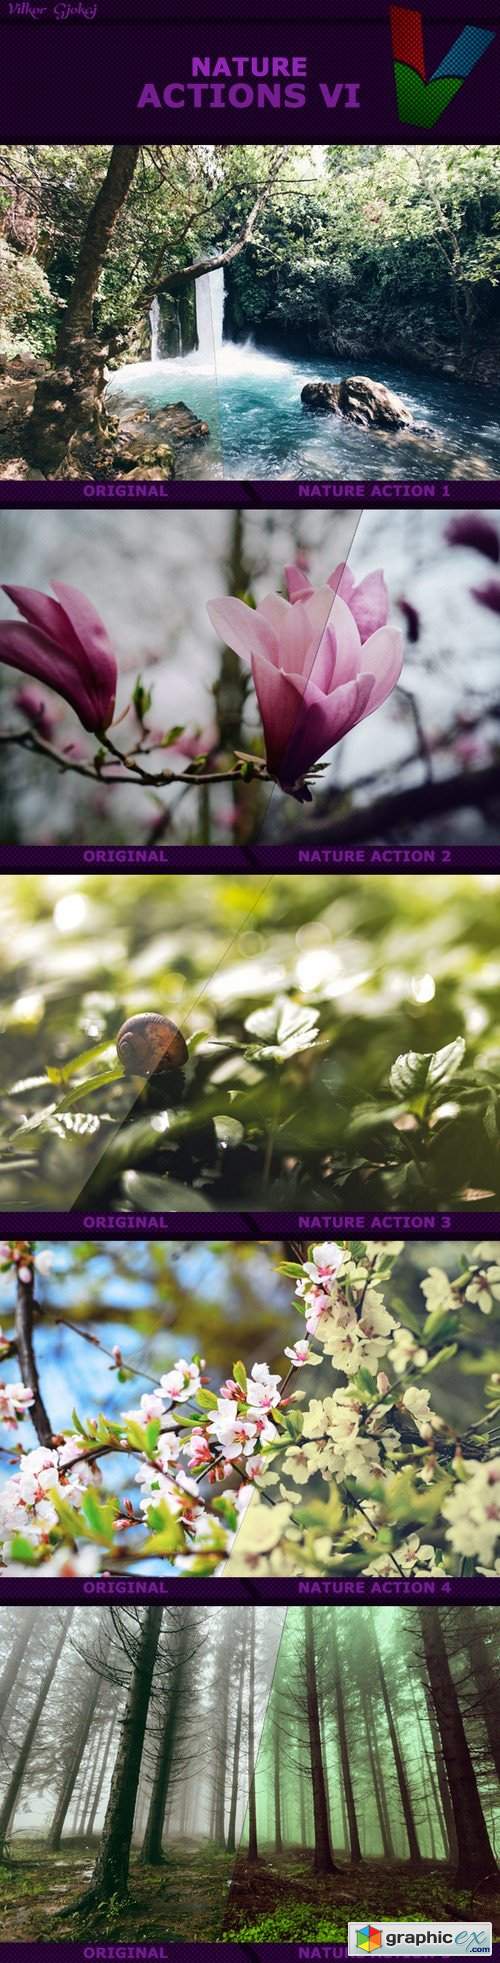 Nature Actions VI